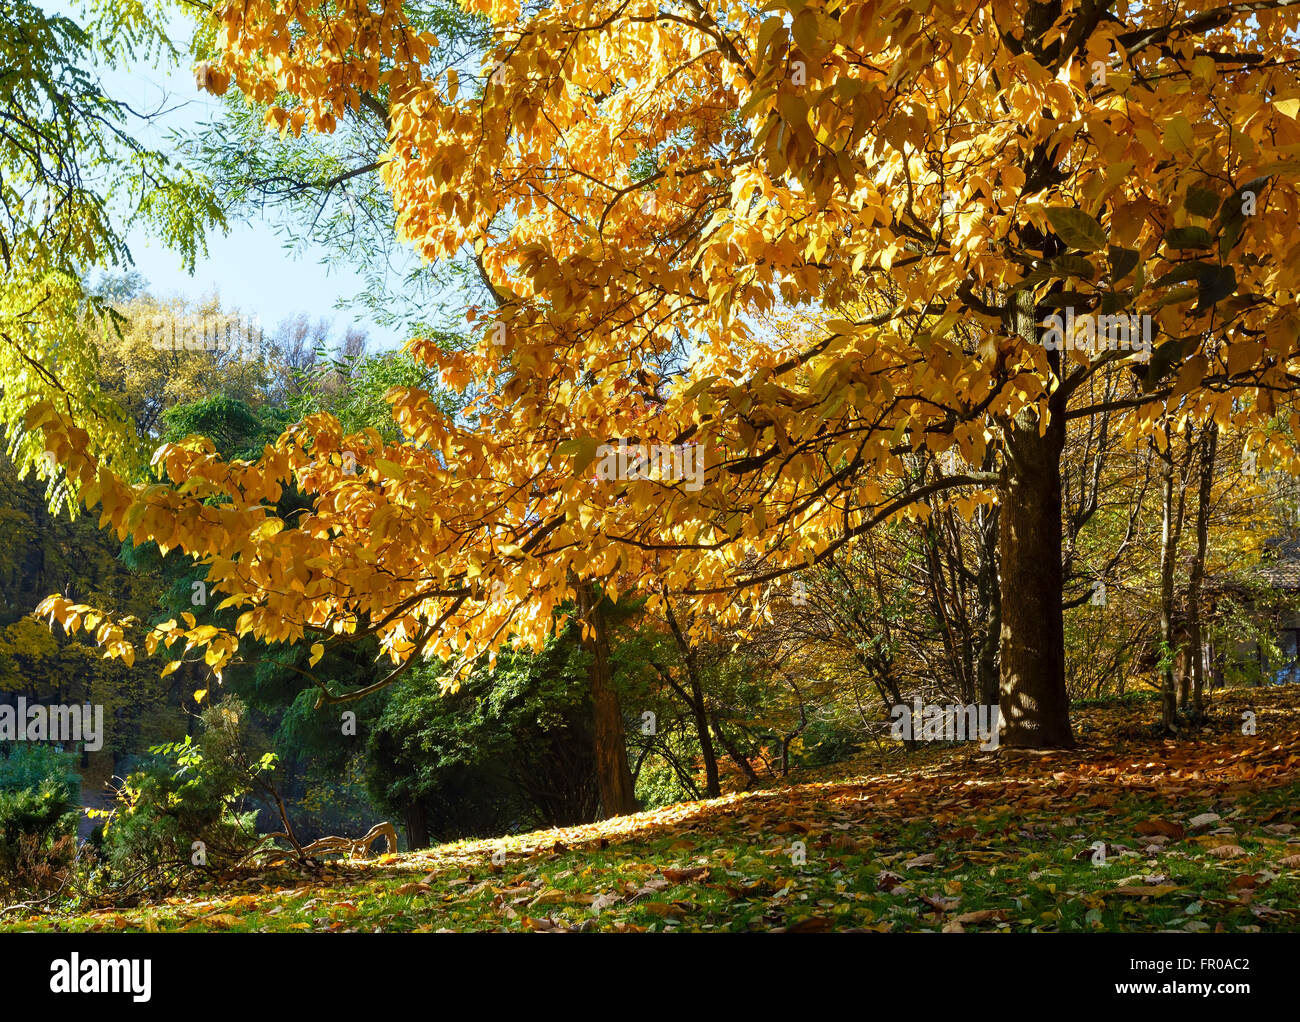 Beech tree twigs with autumn yellow-brown leaves and green grass under him in city park. Stock Photo